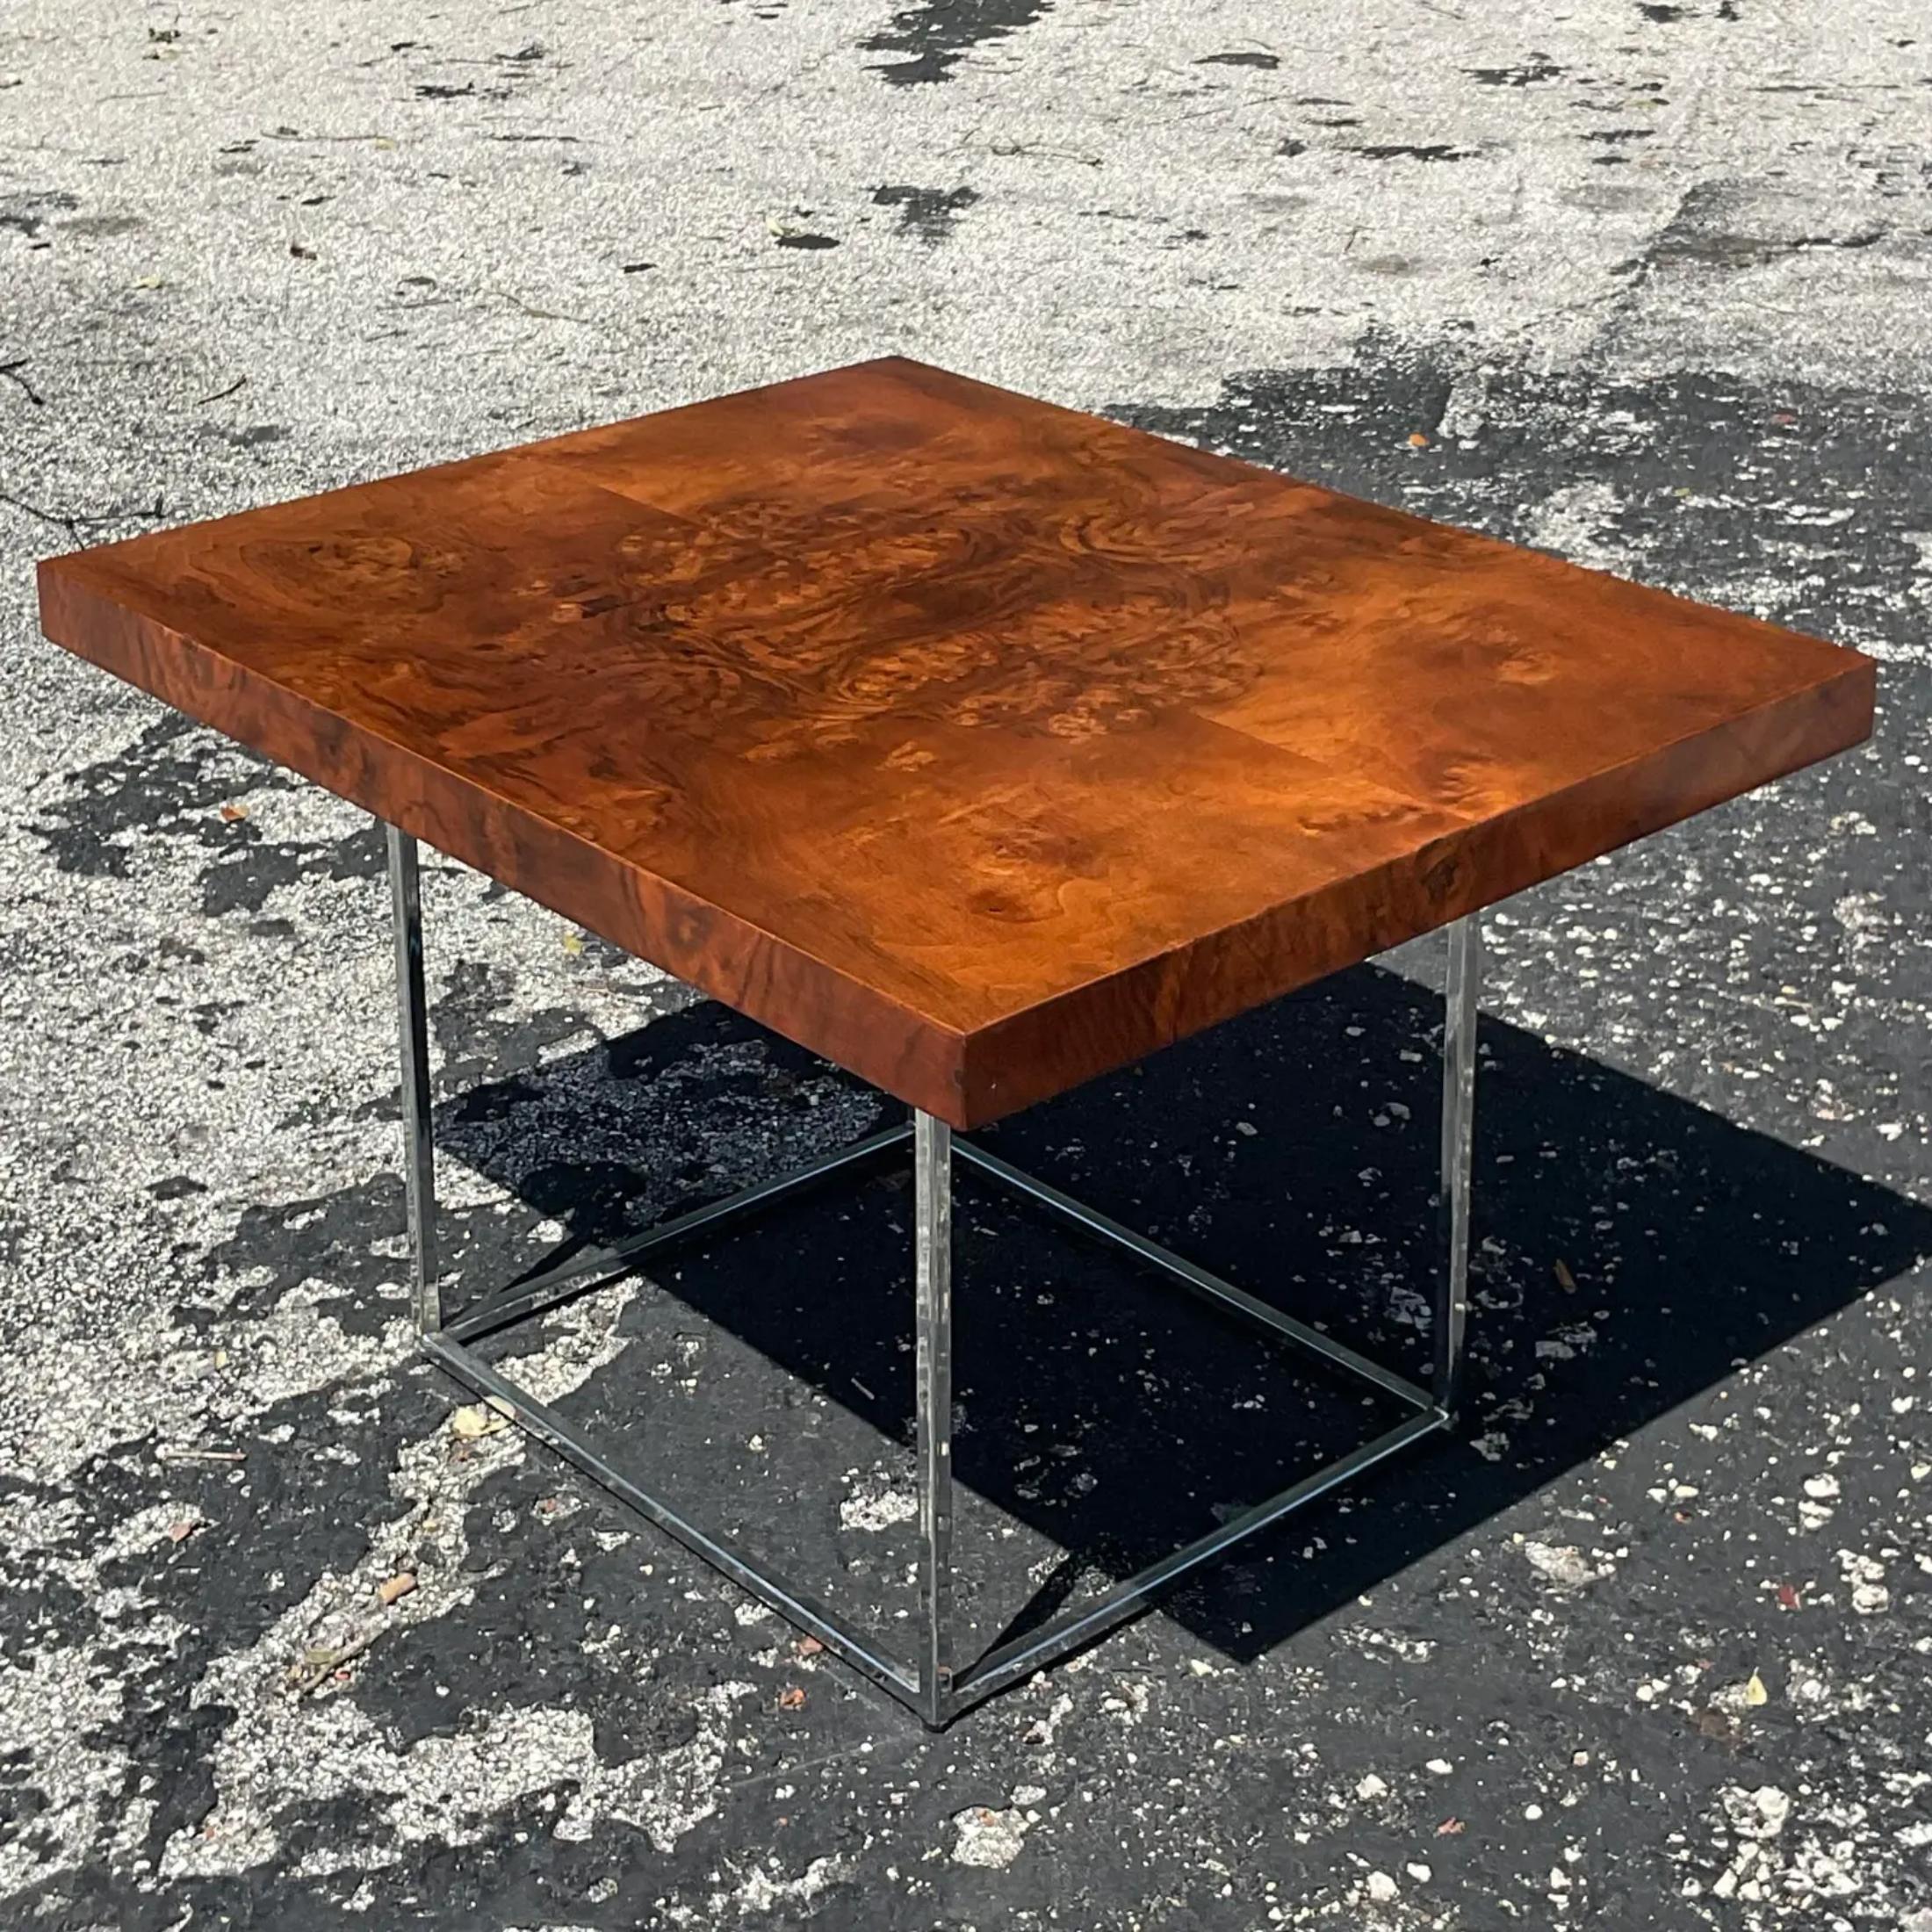 A fabulous vintage Boho coffee table. A chic Burl wood with gorgeous wood grain detail. Rests on a chrome tubular pedestal. Done in the manner of Milo Baughman. Smaller in size so it’s perfect for smaller spaces. Acquired from a Palm Beach estate.